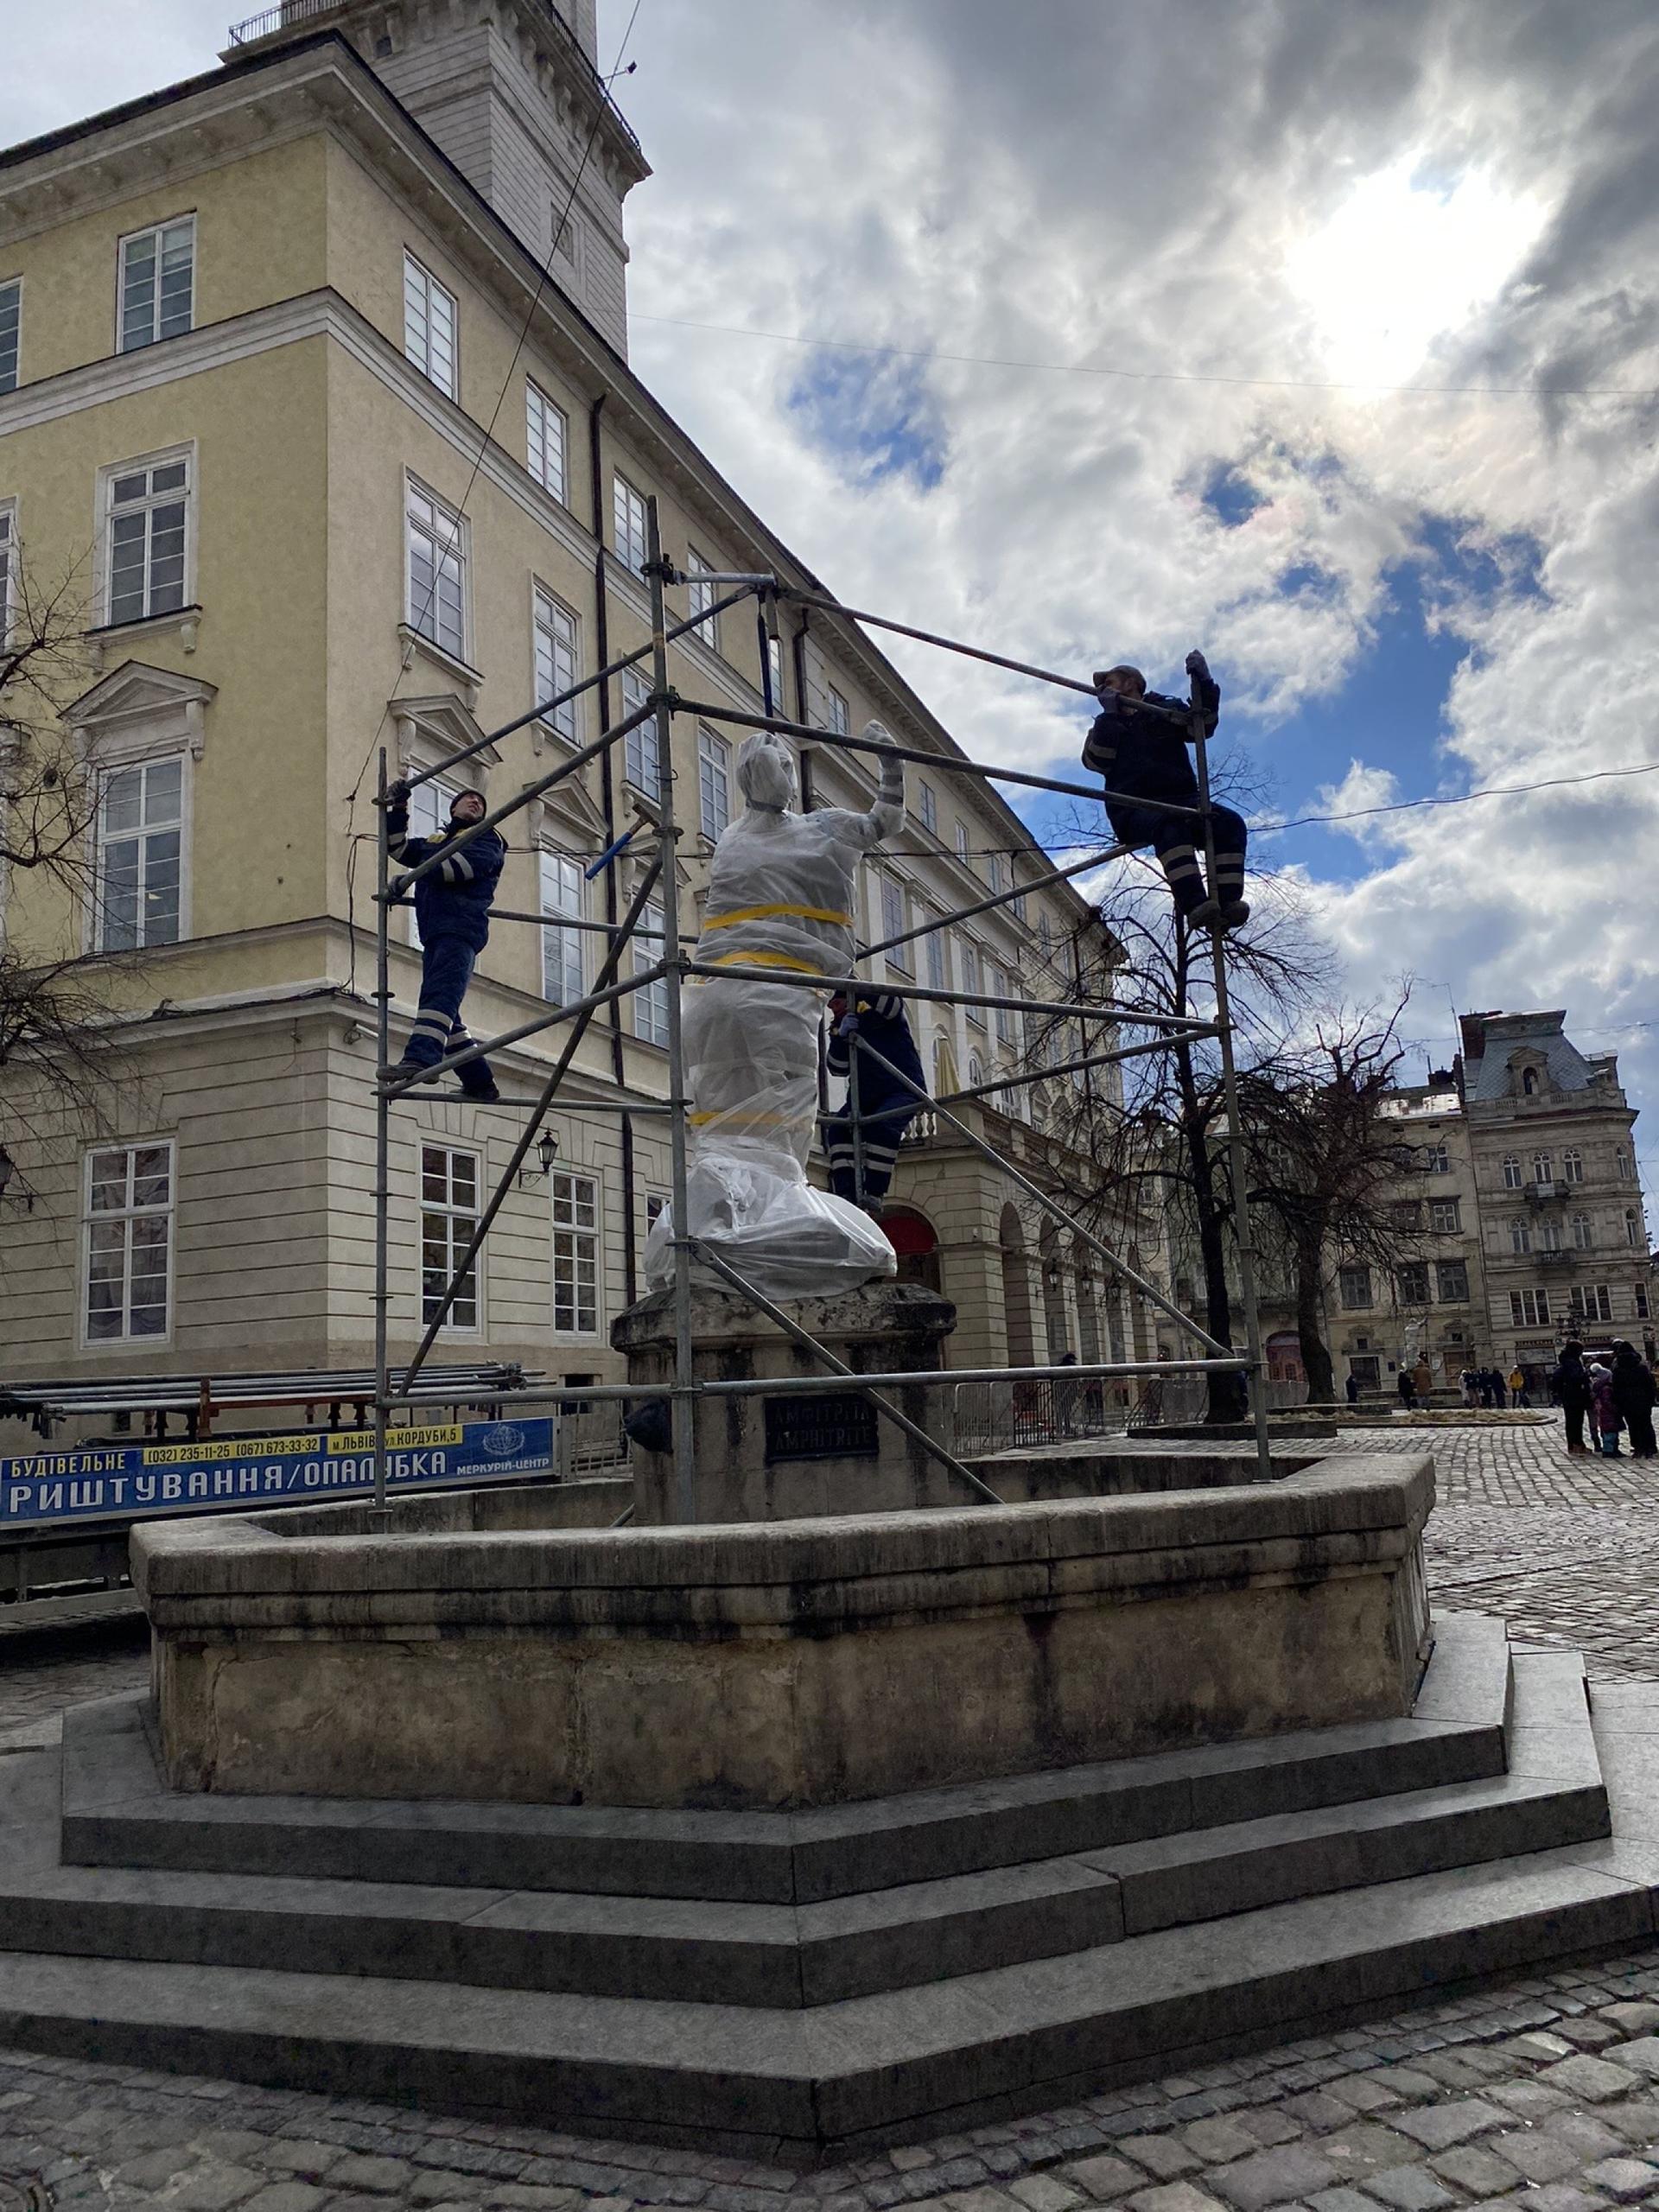 Workers construct metal scaffolding around the statue of Greek goddess Amphitrite in Lviv's medieval Market Square